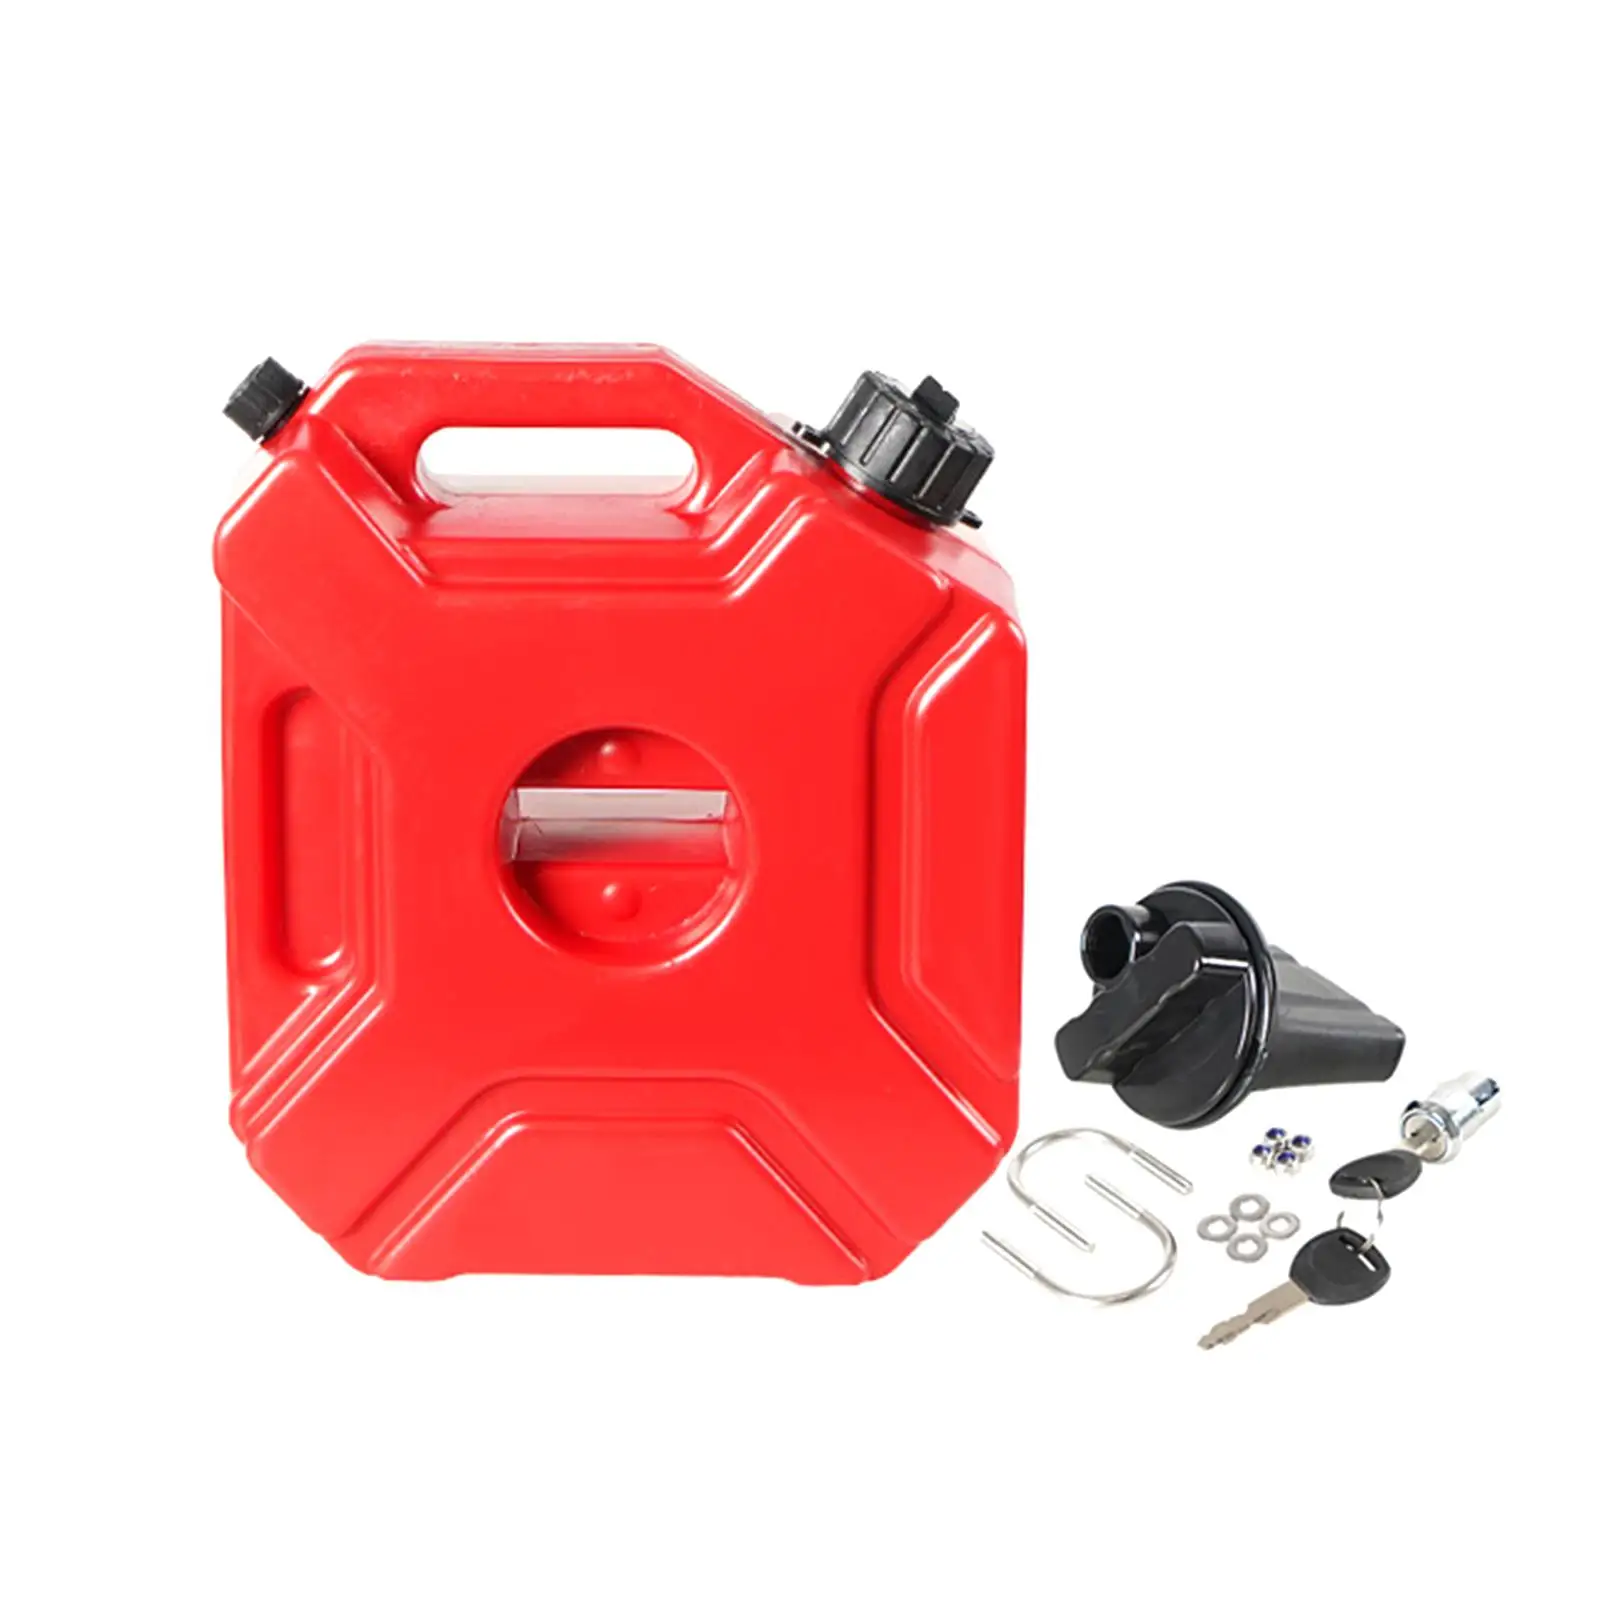 Petrol Tanks 5L Durable Plastic with Lock and Keys Easily Install Spare Tank for Car Travel SUV Automotive Moto Accessories